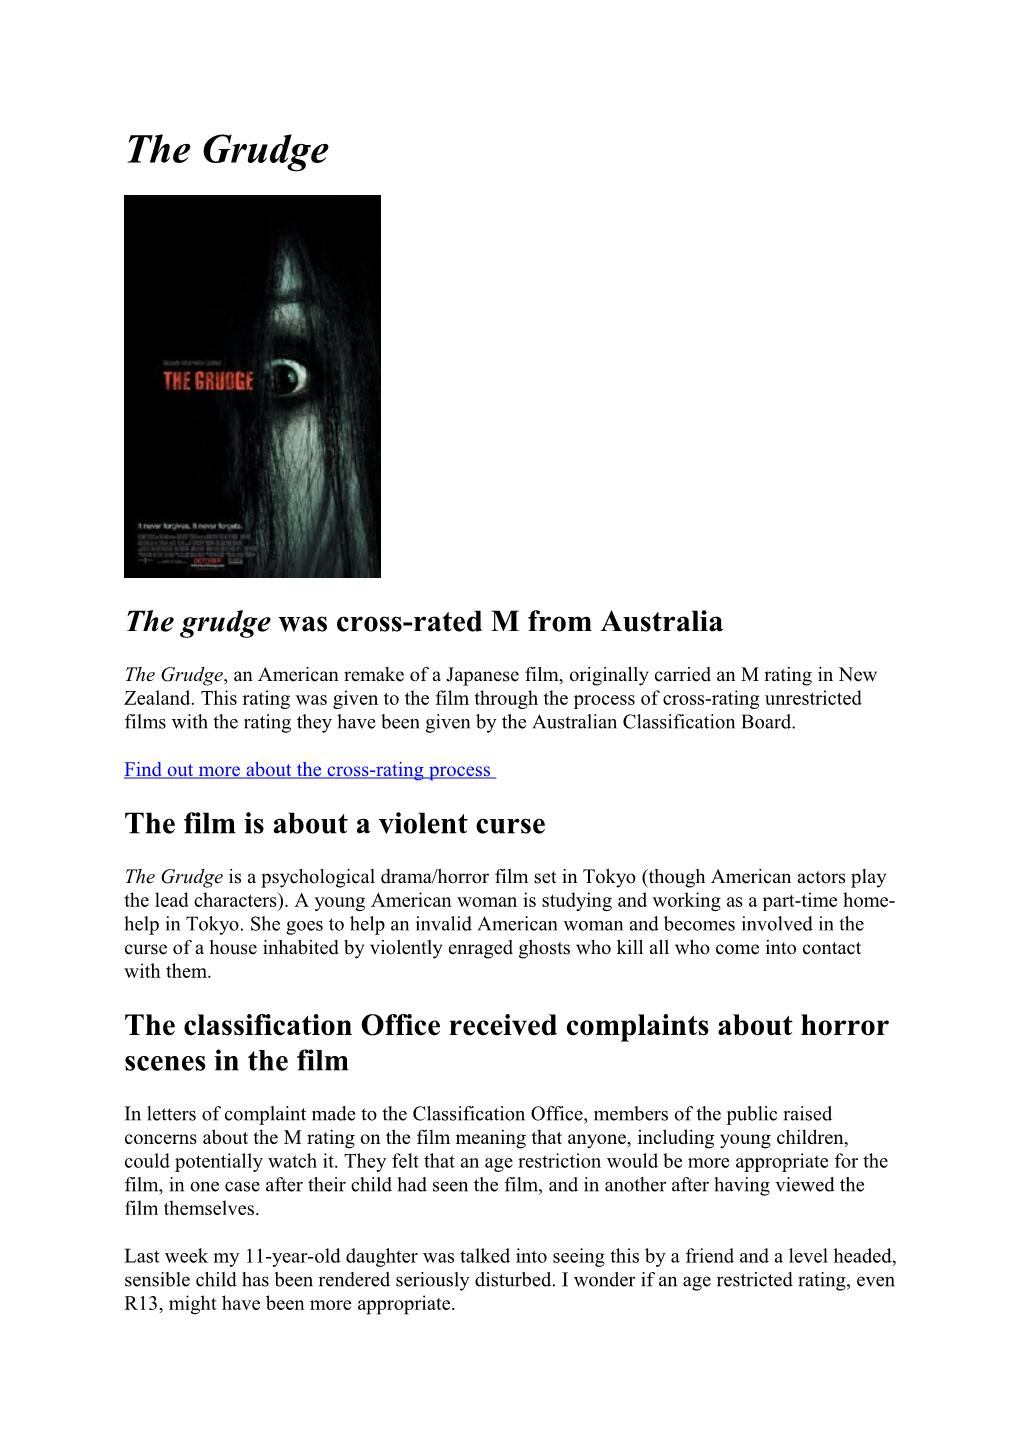 The Grudge Was Cross-Rated M from Australia